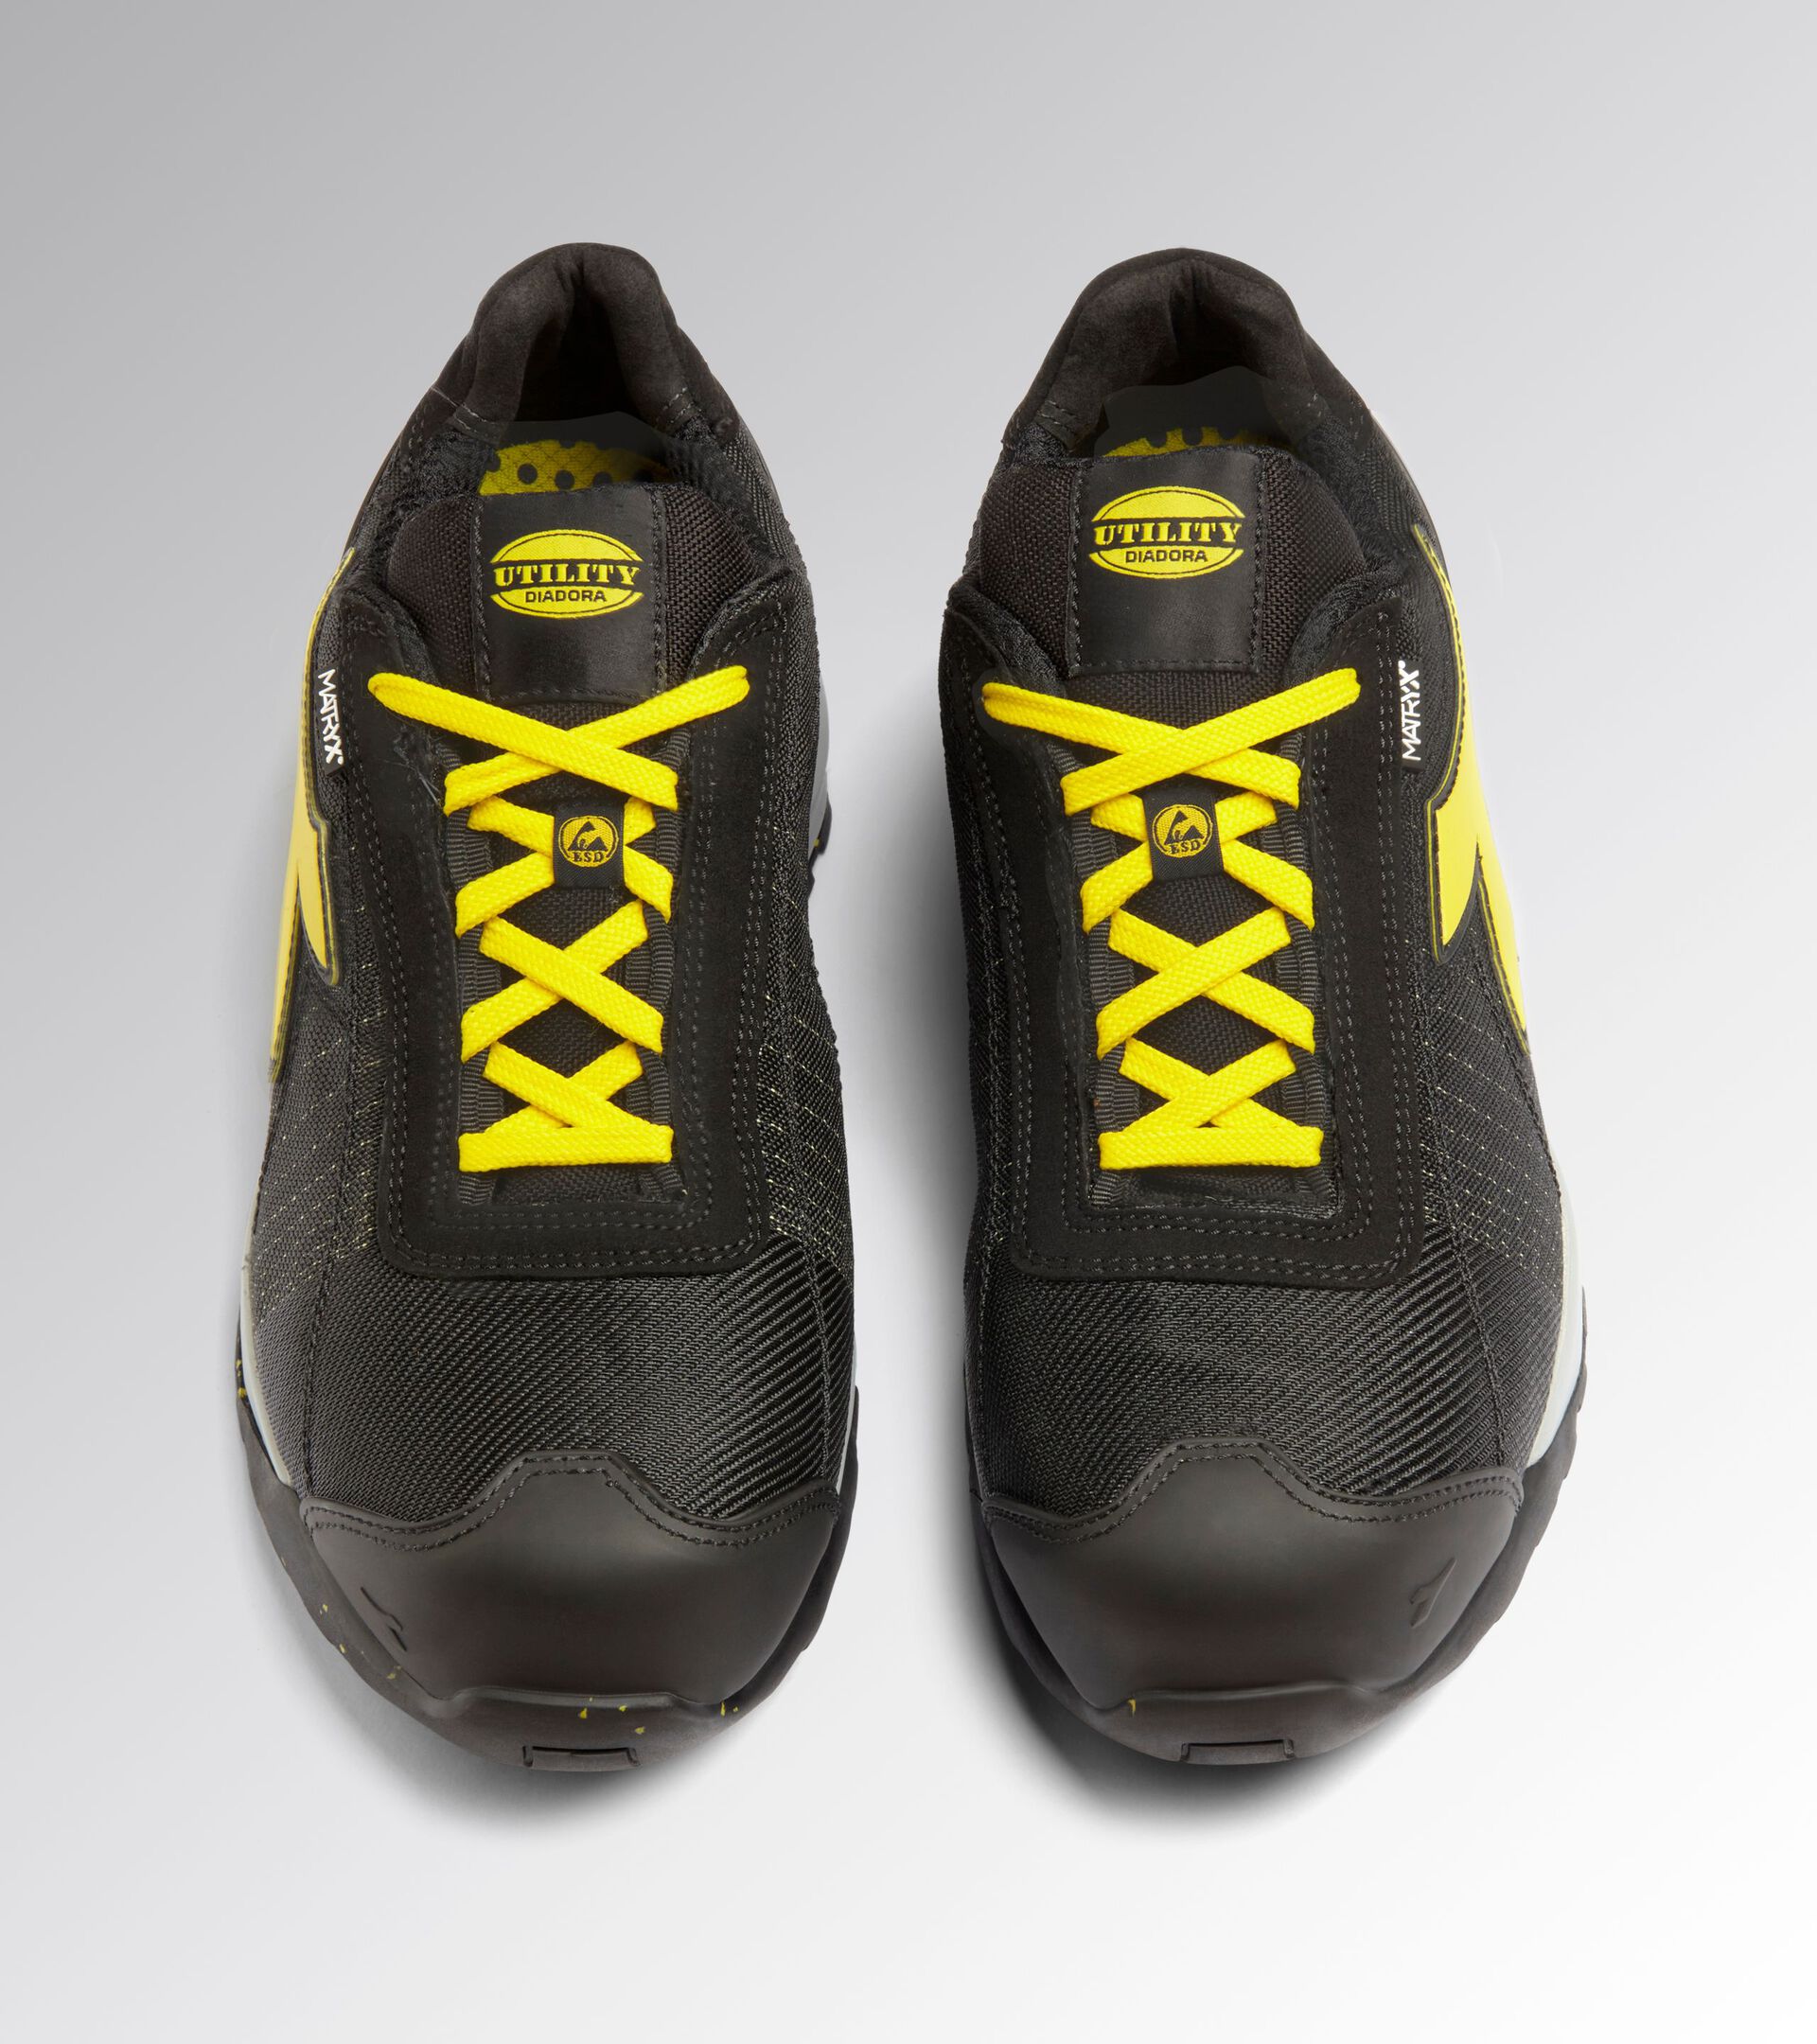 Low safety shoe GLOVE MDS MTX LOW S1PS HRO FO SR SC ESD BLACK/YELLOW - Utility